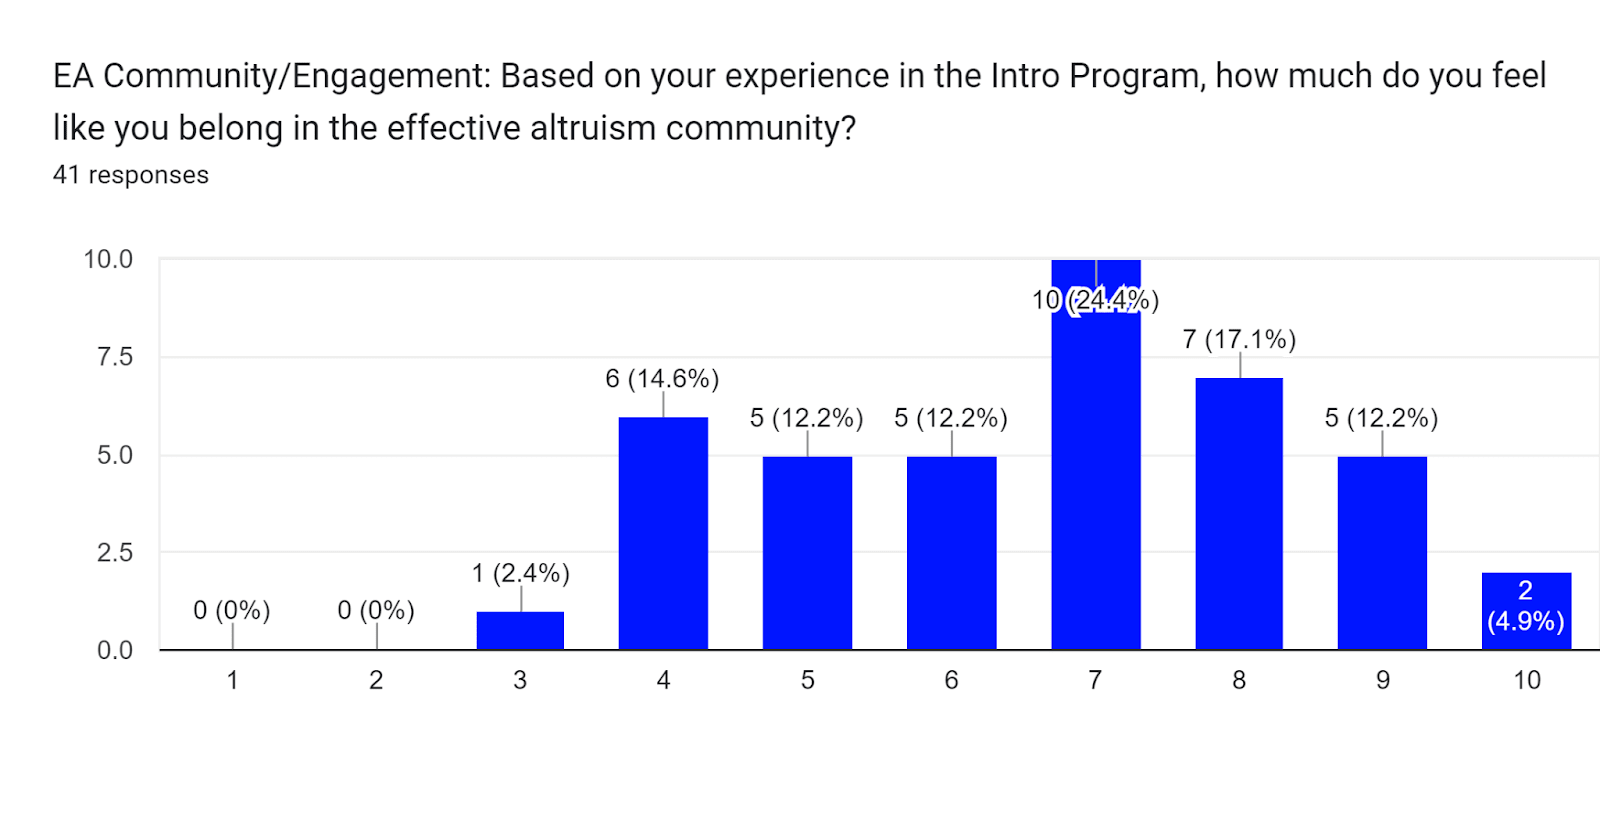 Forms response chart. Question title: EA Community/Engagement: Based on your experience in the Intro Program, how much do you feel like you belong in the effective altruism community?. Number of responses: 41 responses.